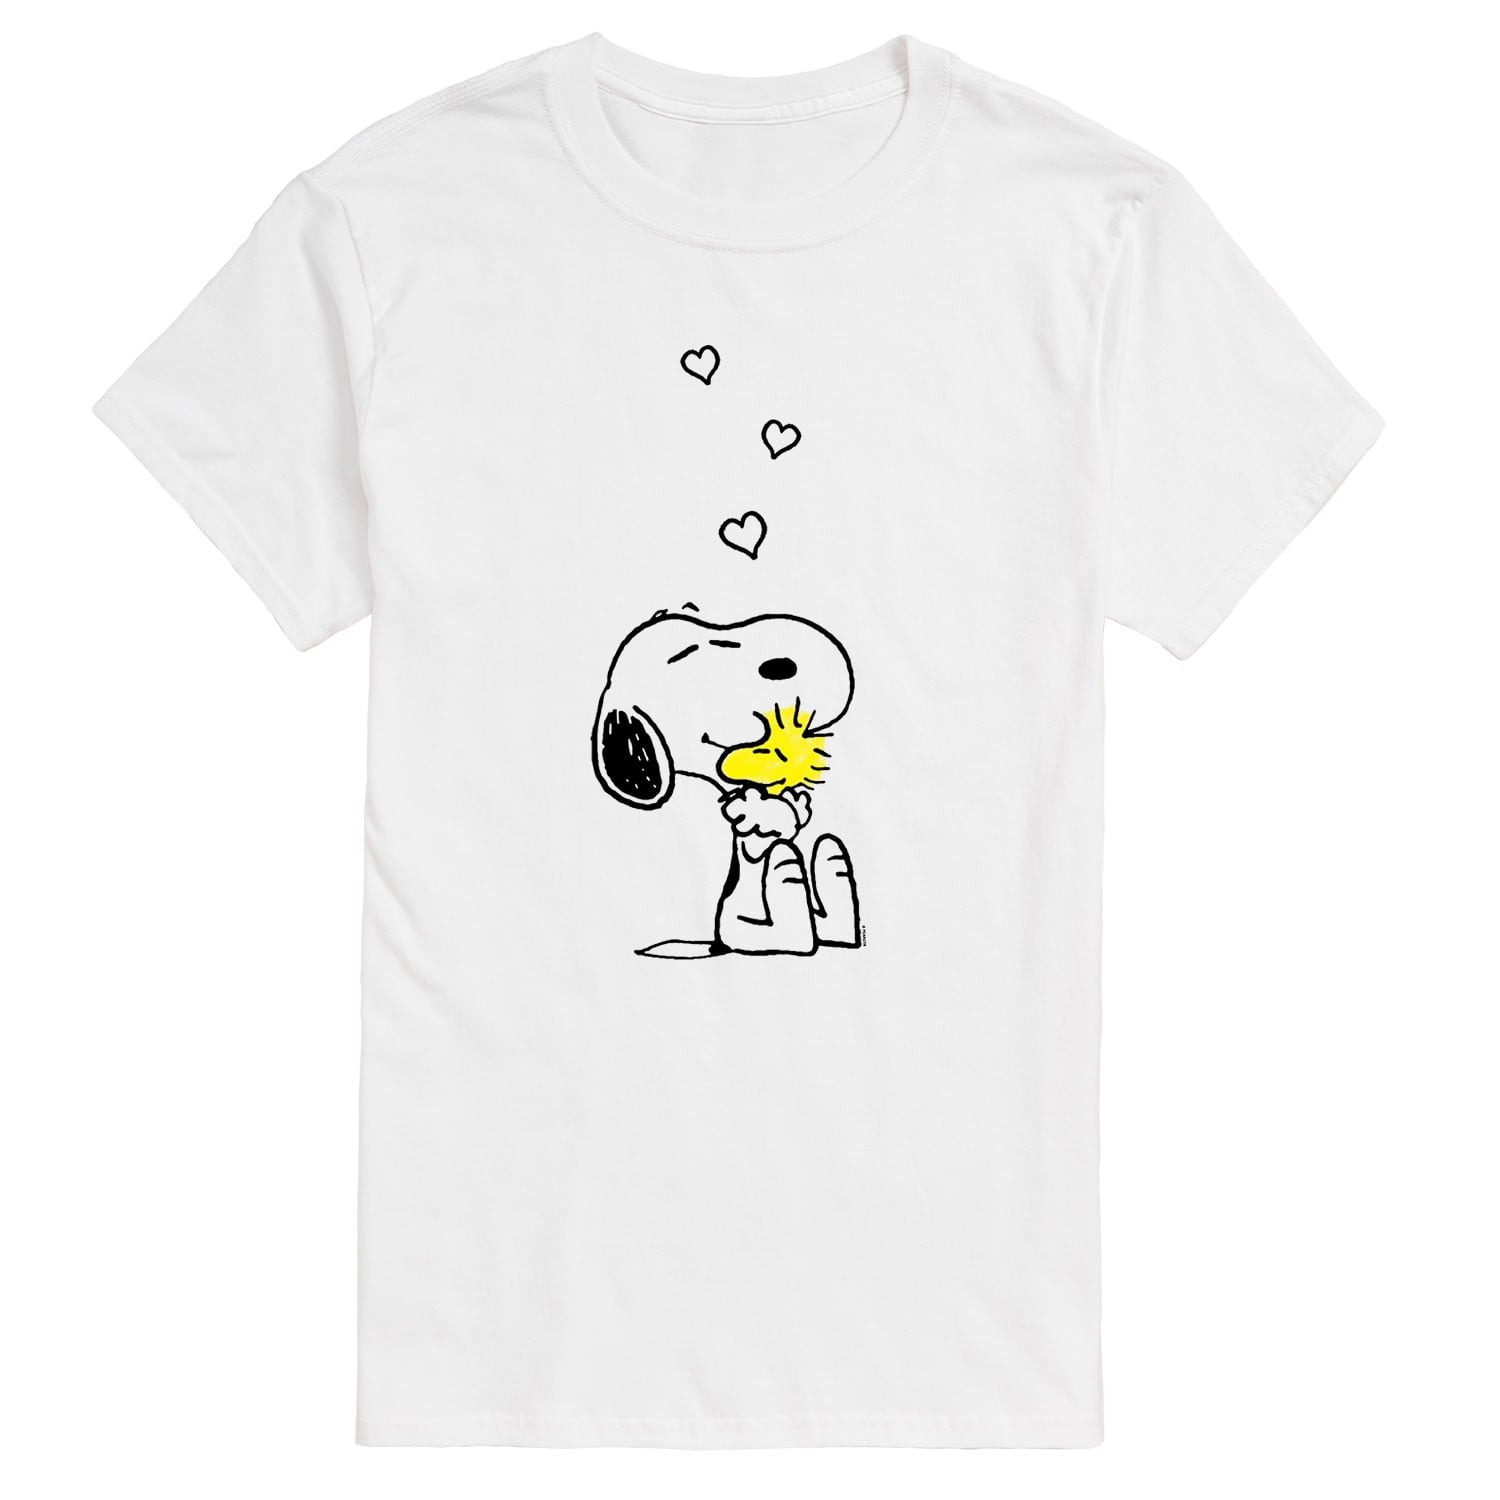 Peanuts - Best of Snoopy And Woodstock - Men's Short Sleeve Graphic T ...